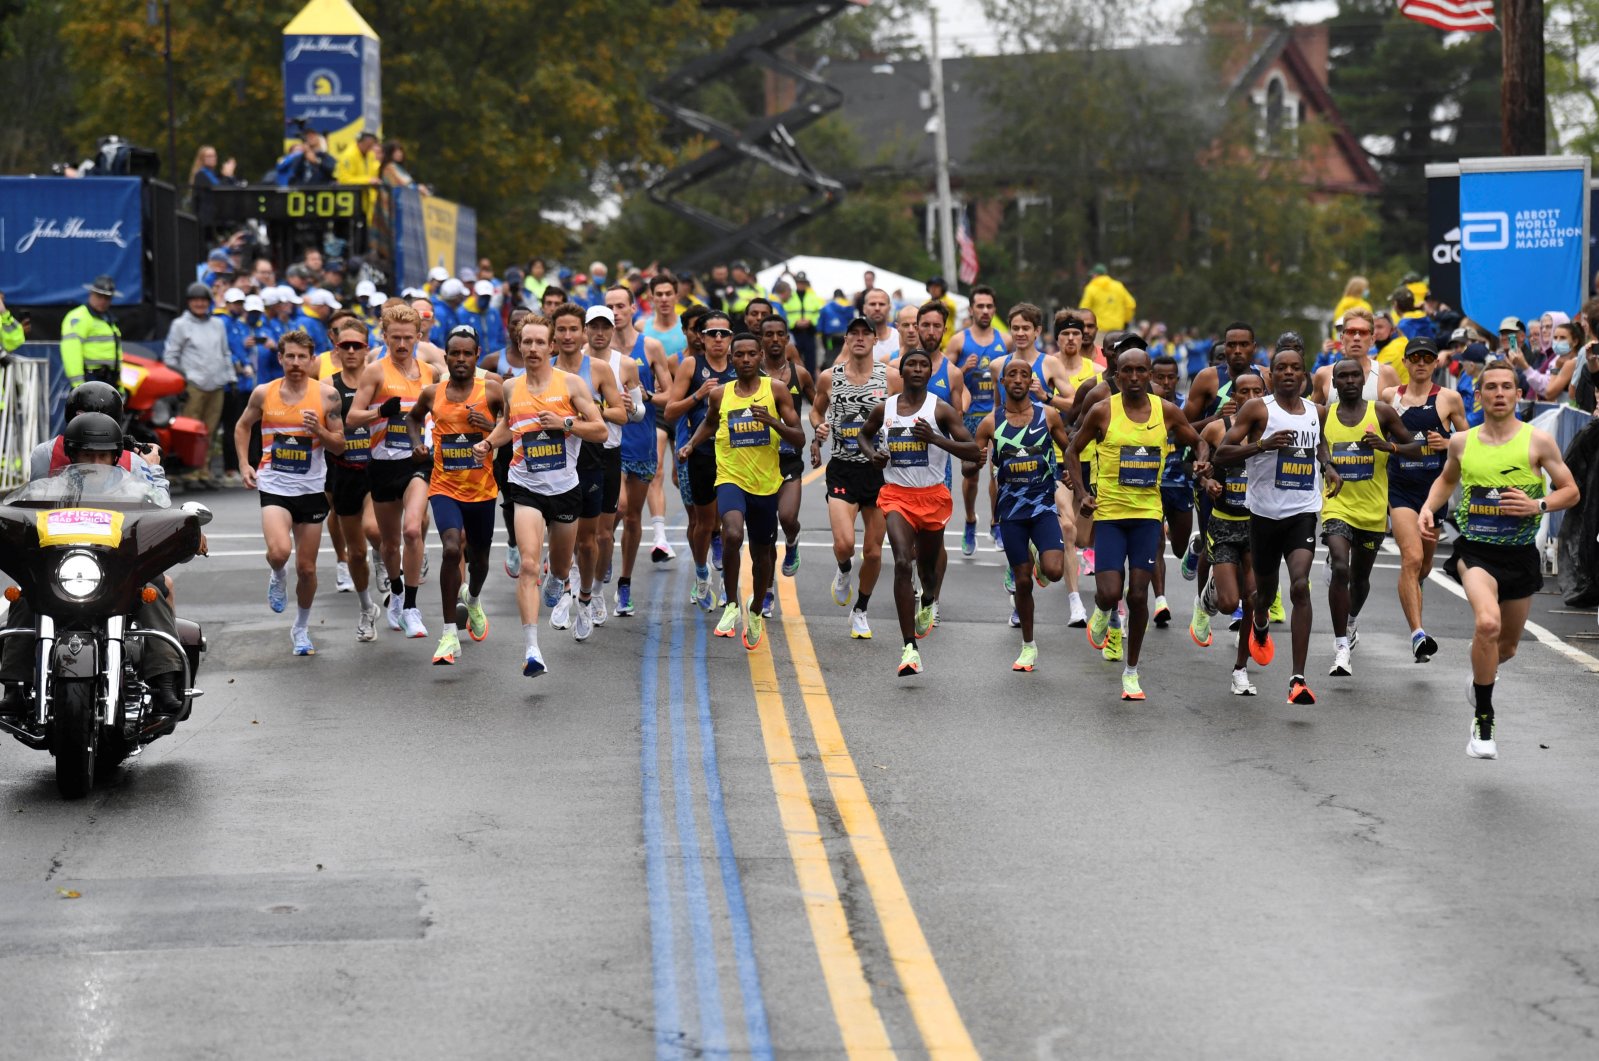 A group of runners at the start of the 2021 Boston Marathon, Boston, U.S., Oct 11, 2021. (Reuters Photo)